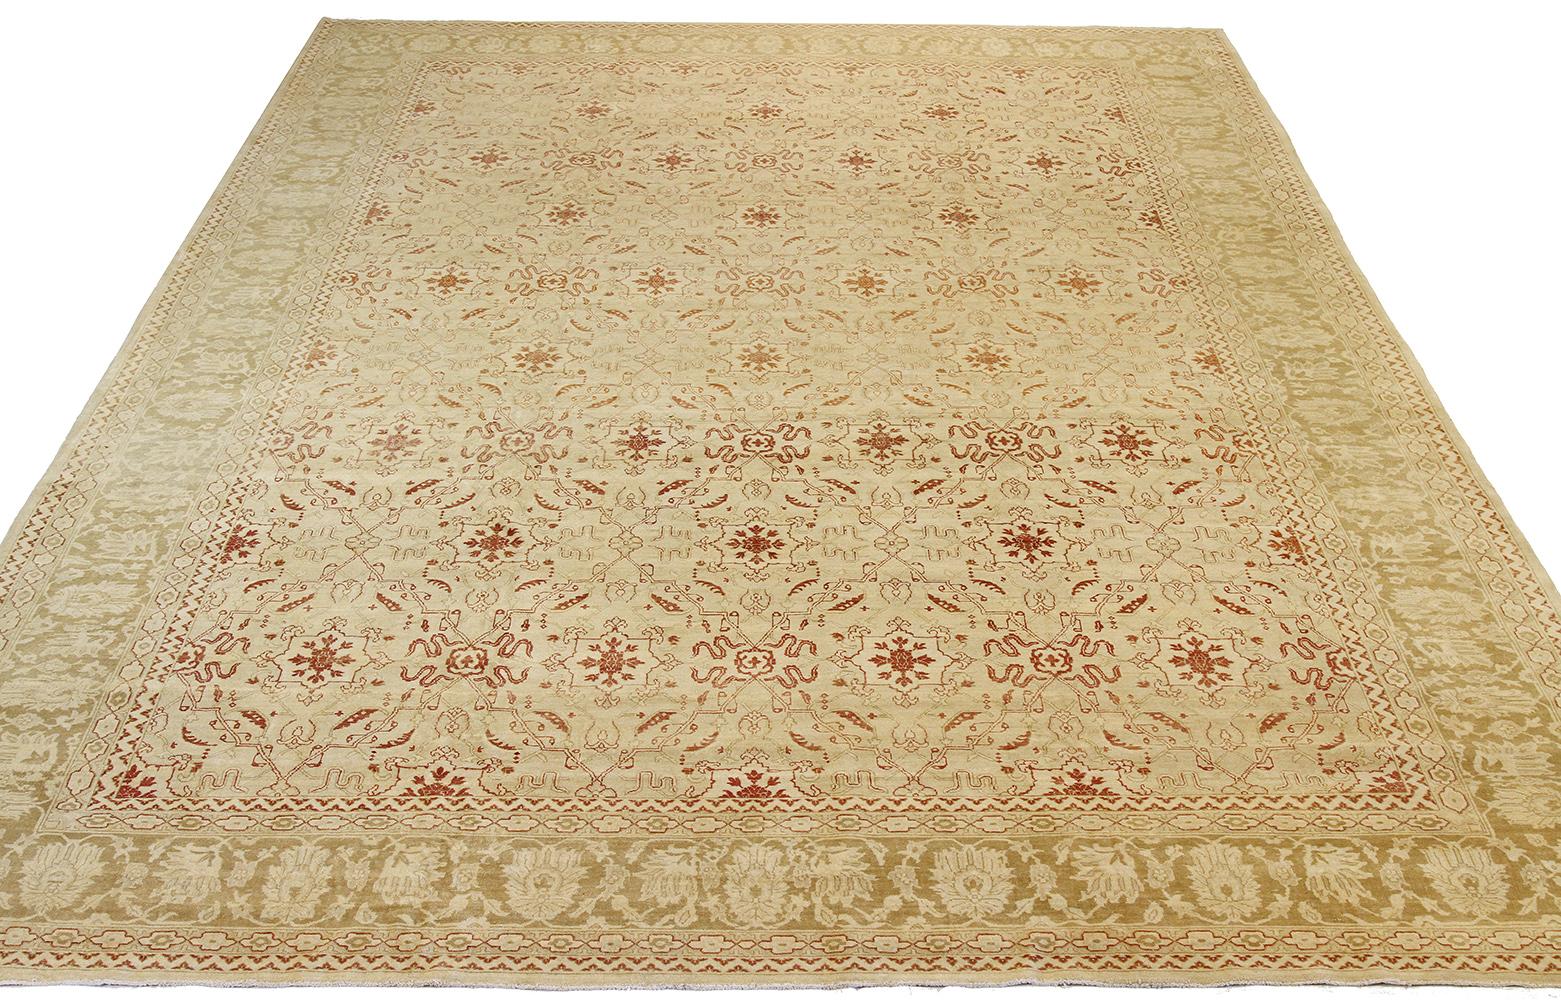 Antique Turkish rug handwoven from the finest sheep’s wool and colored with all-natural vegetable dyes that are safe for humans and pets. It’s a traditional Agra weaving design featuring botanical patterns in beige and brown on a plush ivory field.